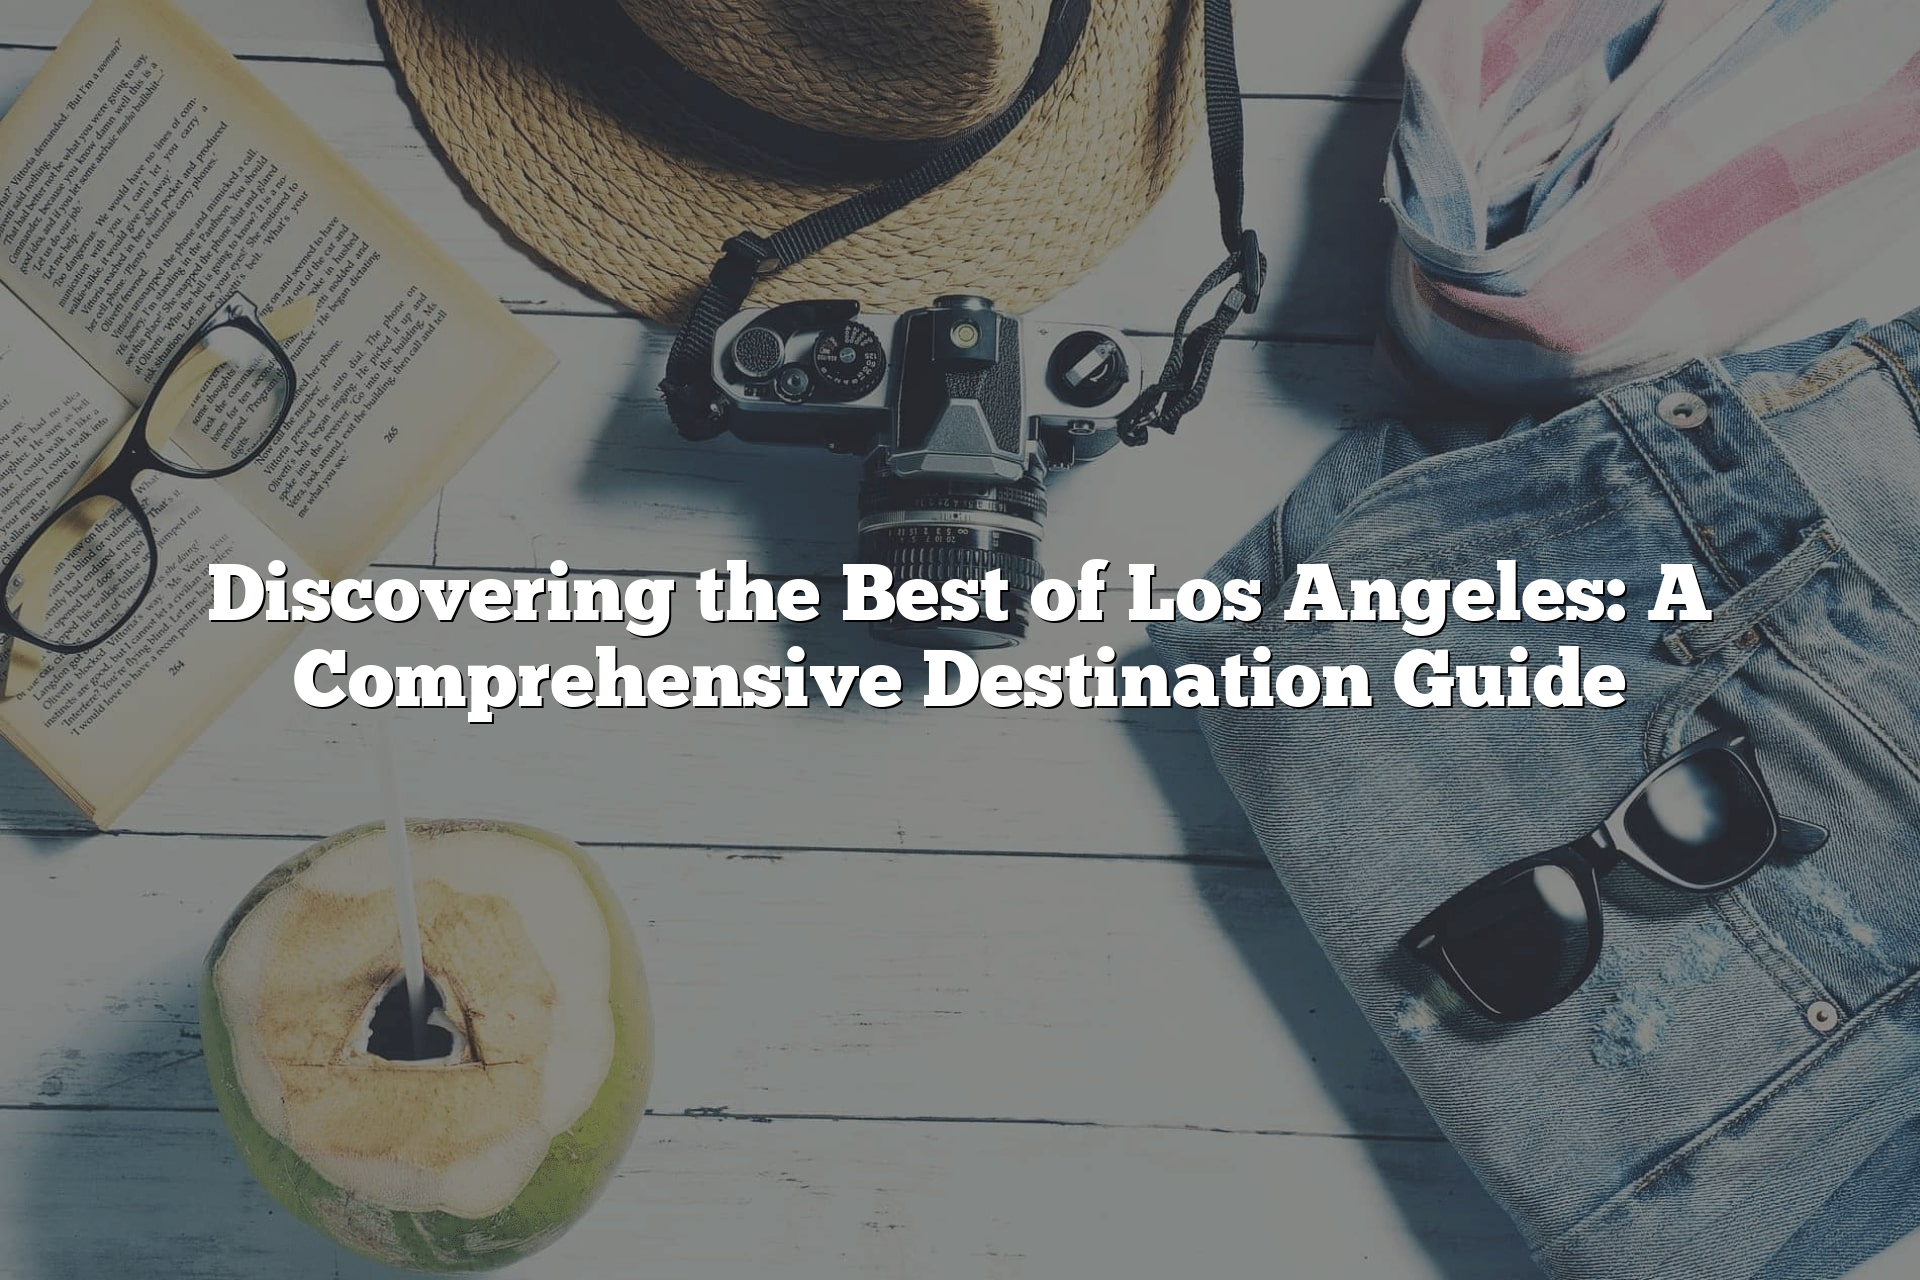 Discovering the Best of Los Angeles: A Comprehensive Destination Guide